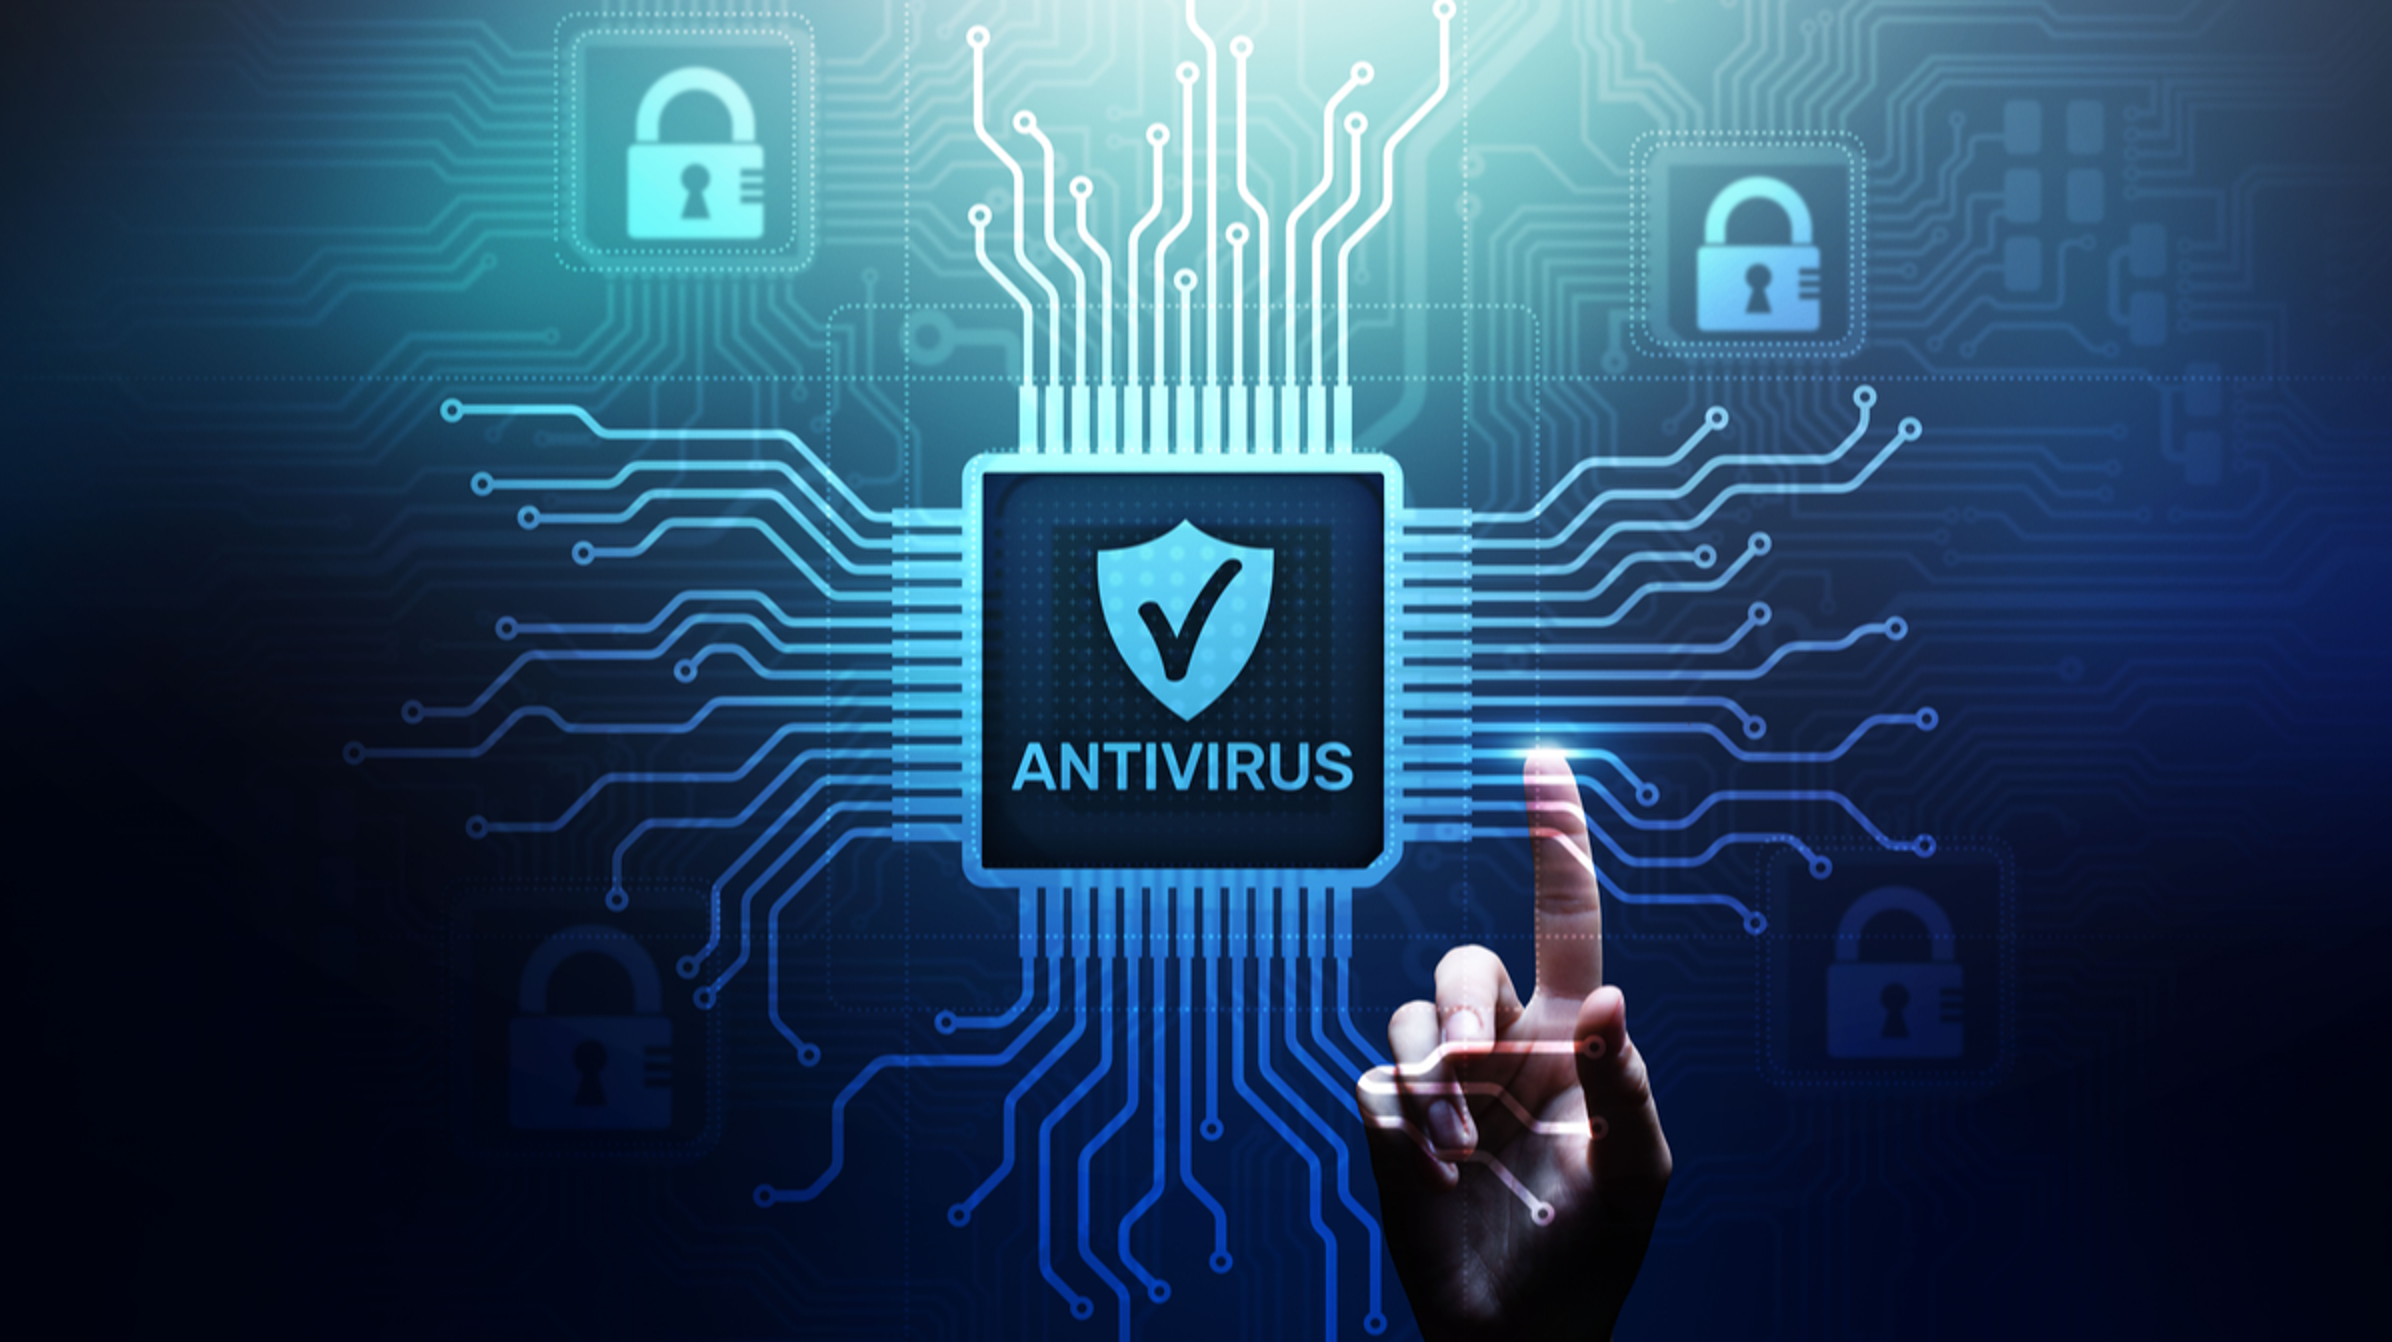 Antiviruses Are Designed To Detect Security Threats And Take Effective Actions Against Them